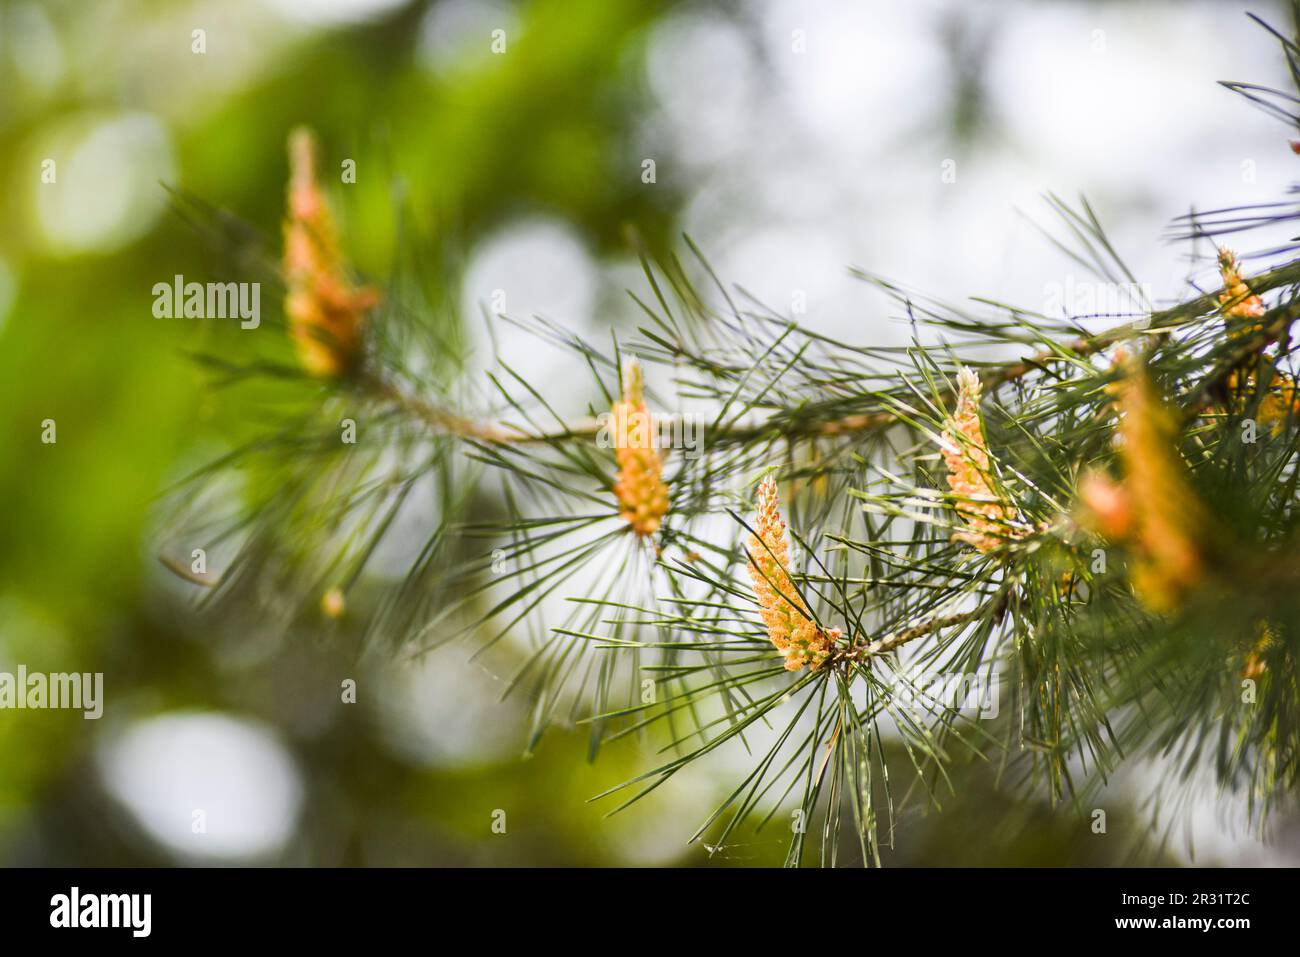 Pine flowers blooming in spring, outdoors in the forest. Stock Photo